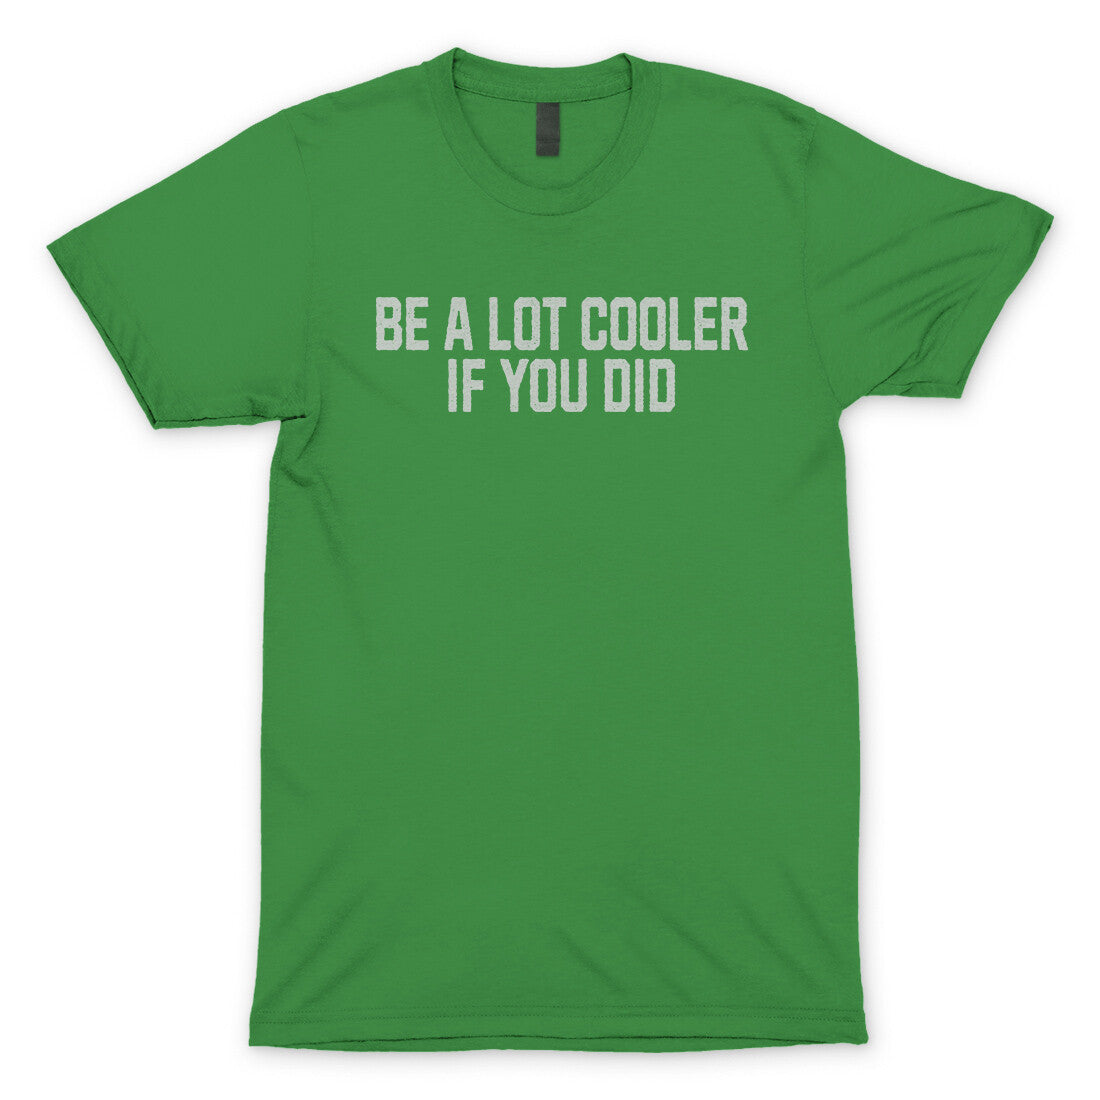 Be a Lot Cooler if you Did in Irish Green Color